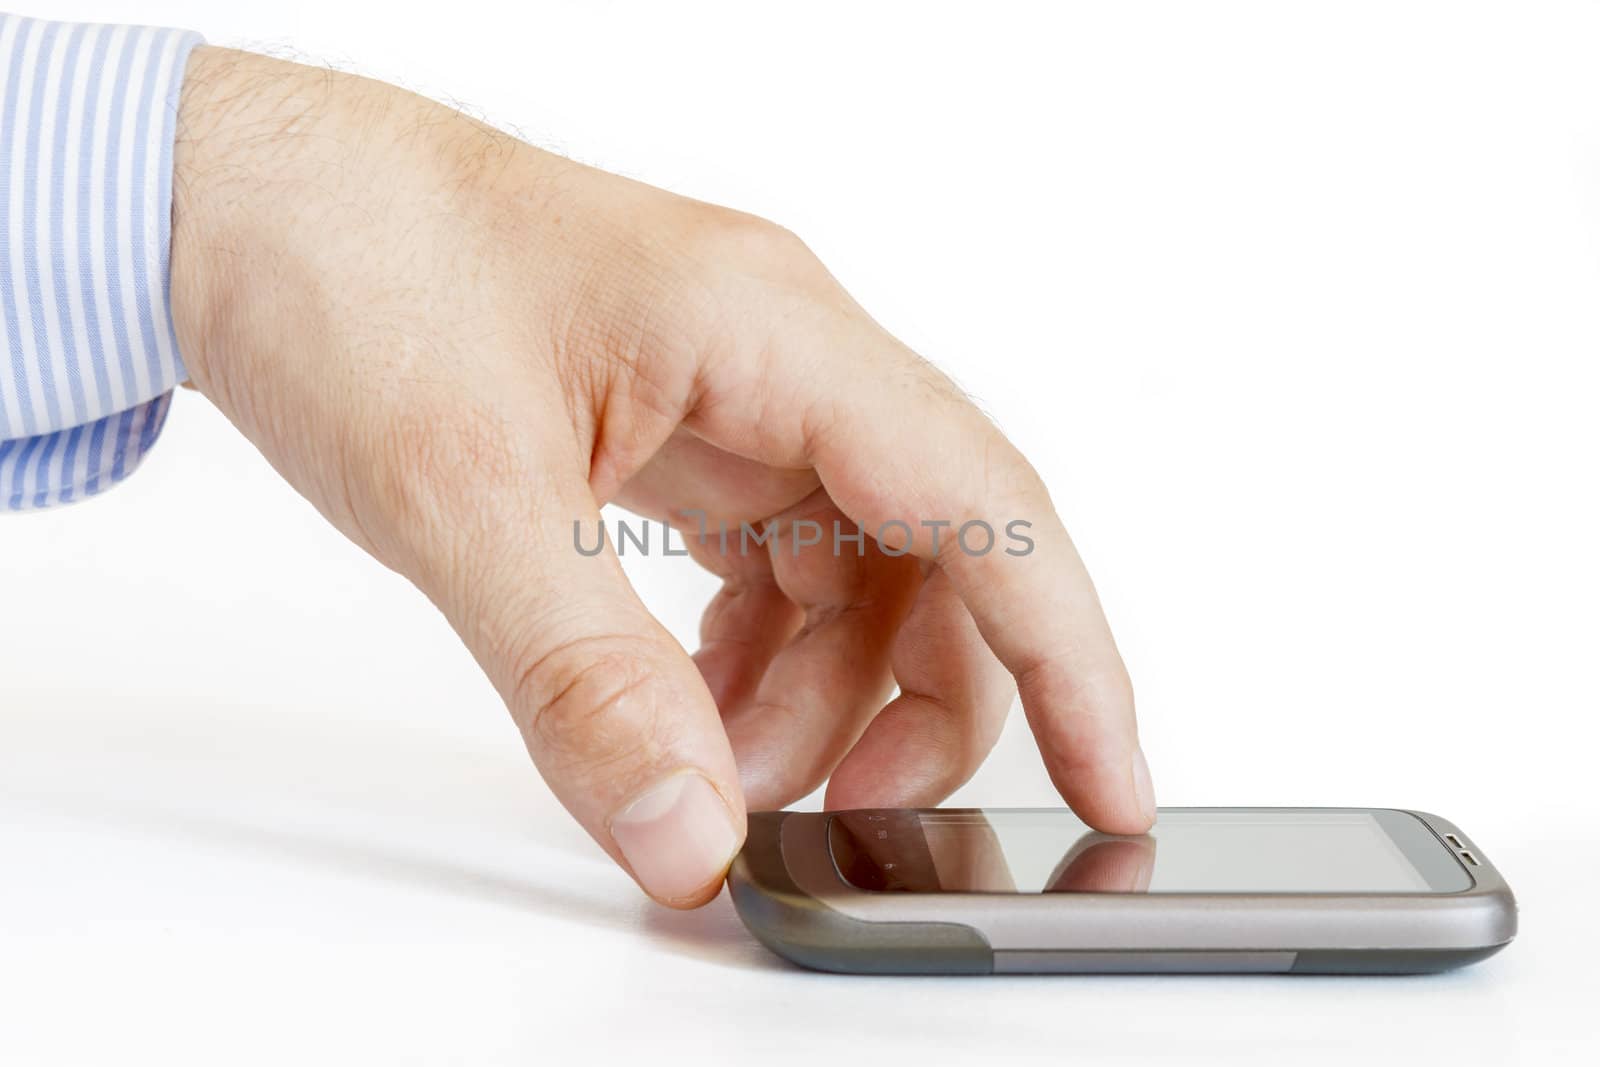 Man hands are pointing on touch screen device